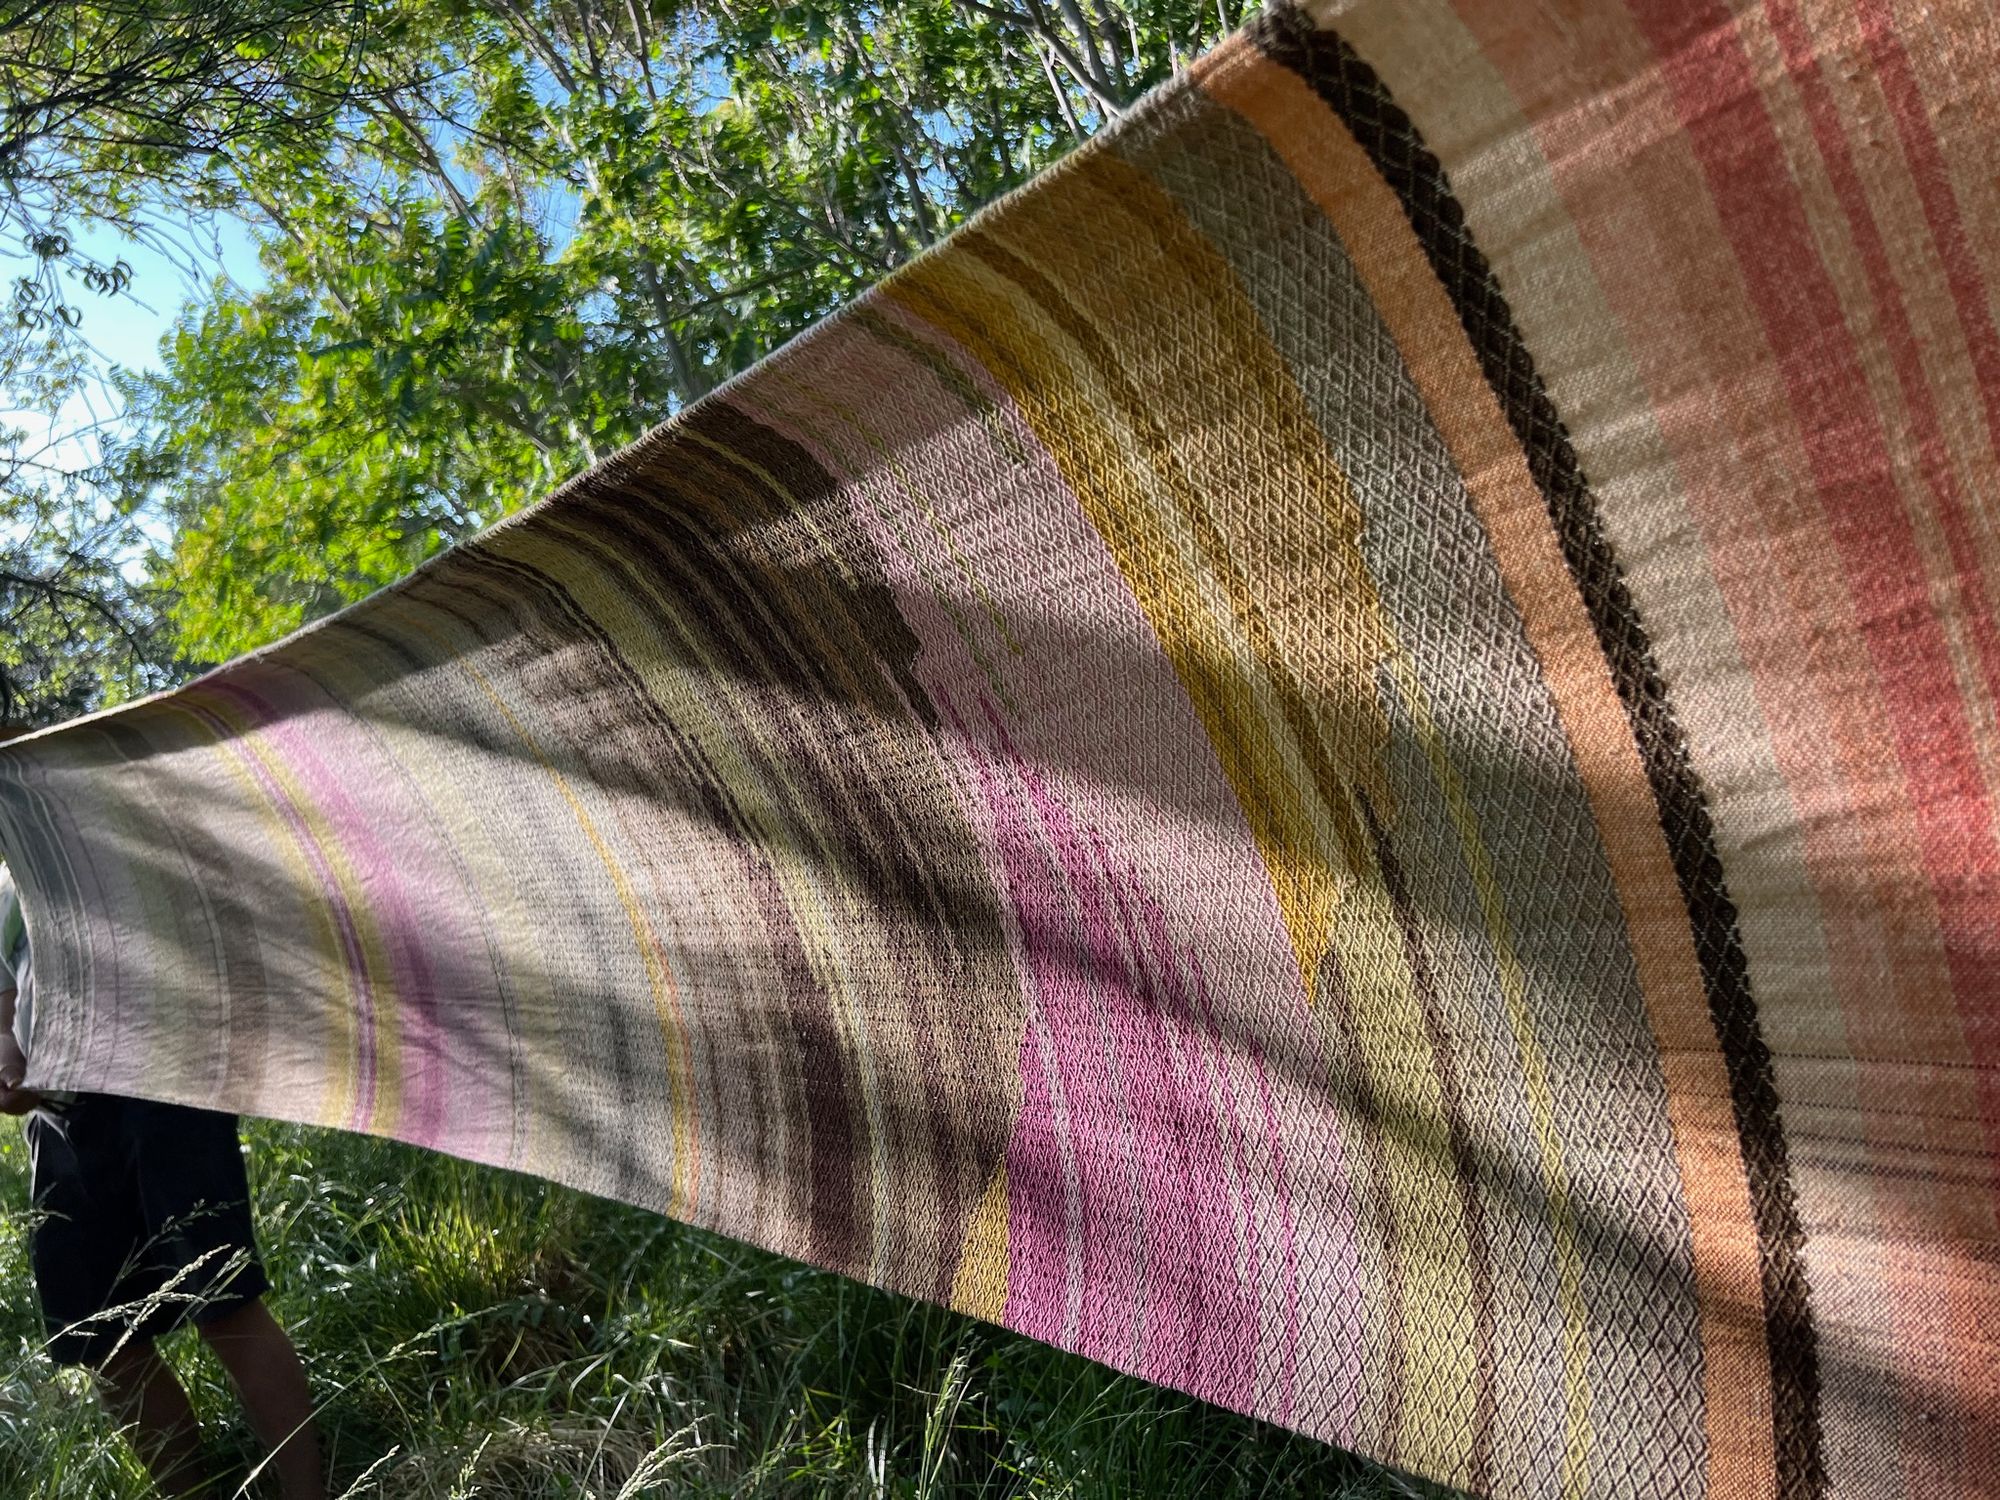 a long piece of handwoven fabric in pink, brown, purple, green, yellow, grey and grey is stretched out in a dense green forestdetail of A long length of handwoven fabric with a diamond pattern in a naturally dyed rainbow of color, brown, grey, pink, purple, yellow, green, orange and lavender lays on a wooden floor